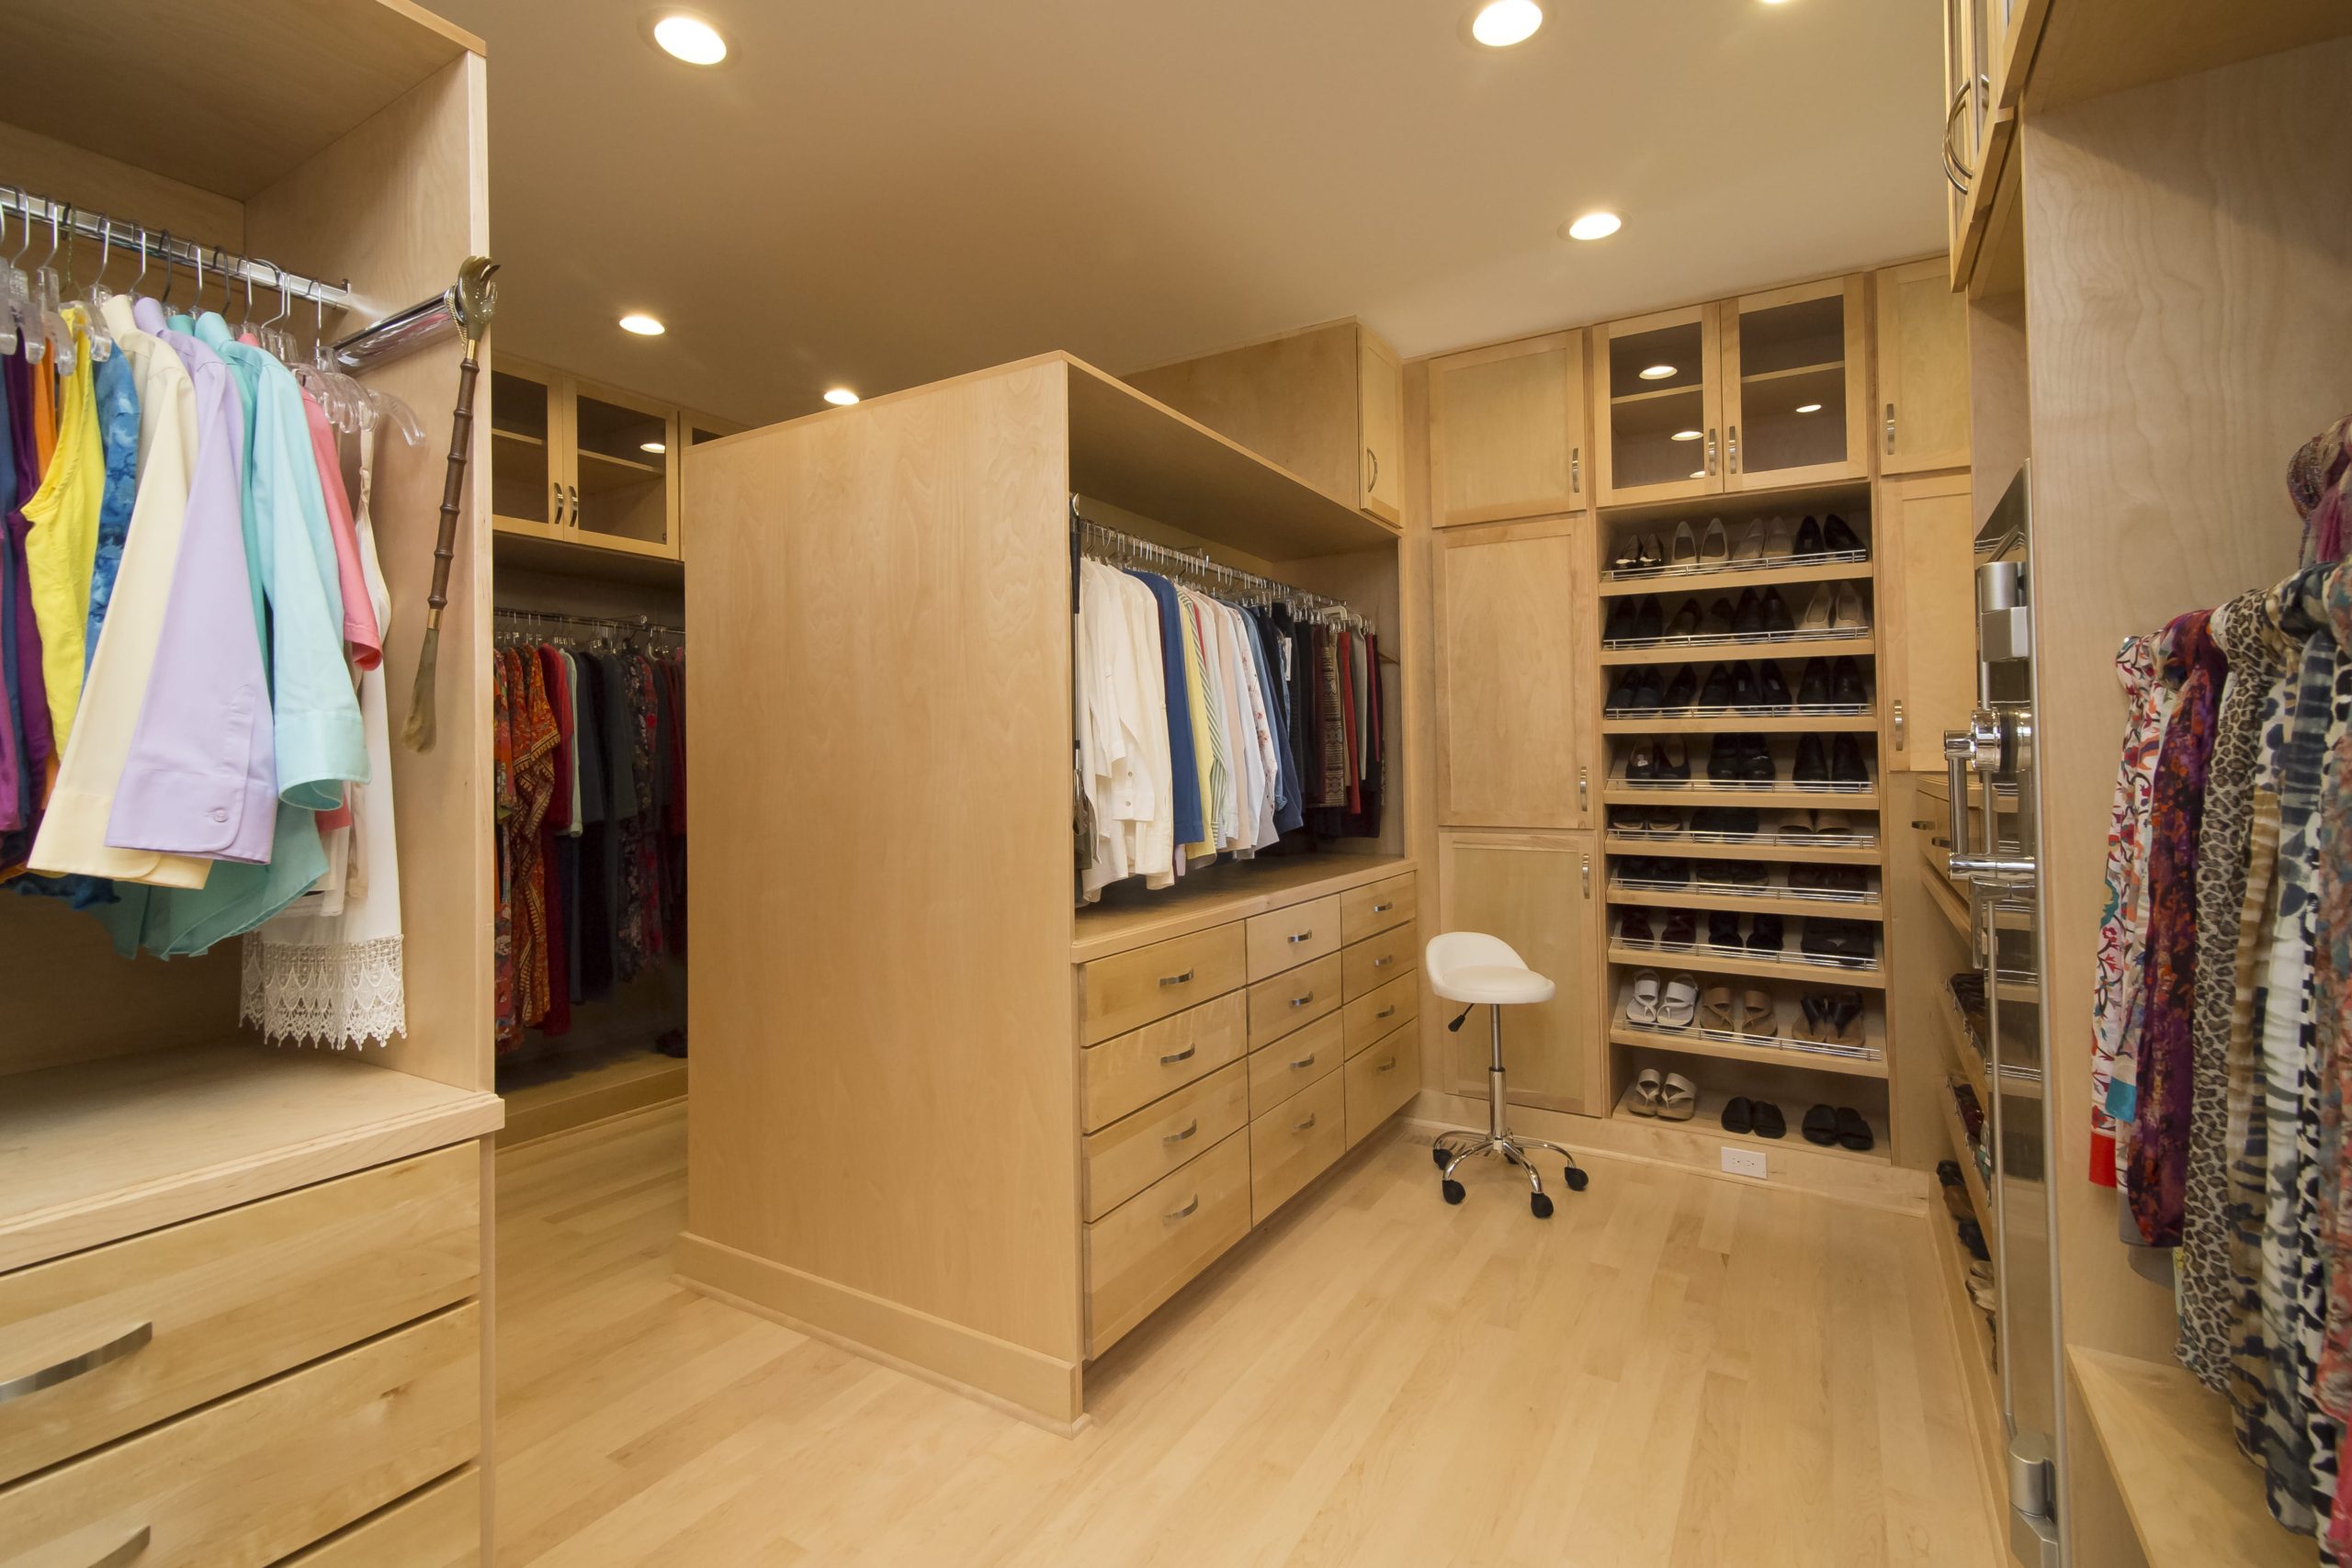 This glamorous primary closet has many different built-in storage options including shoe racks, drawers, cabinets, hanging rods, and cubbies.